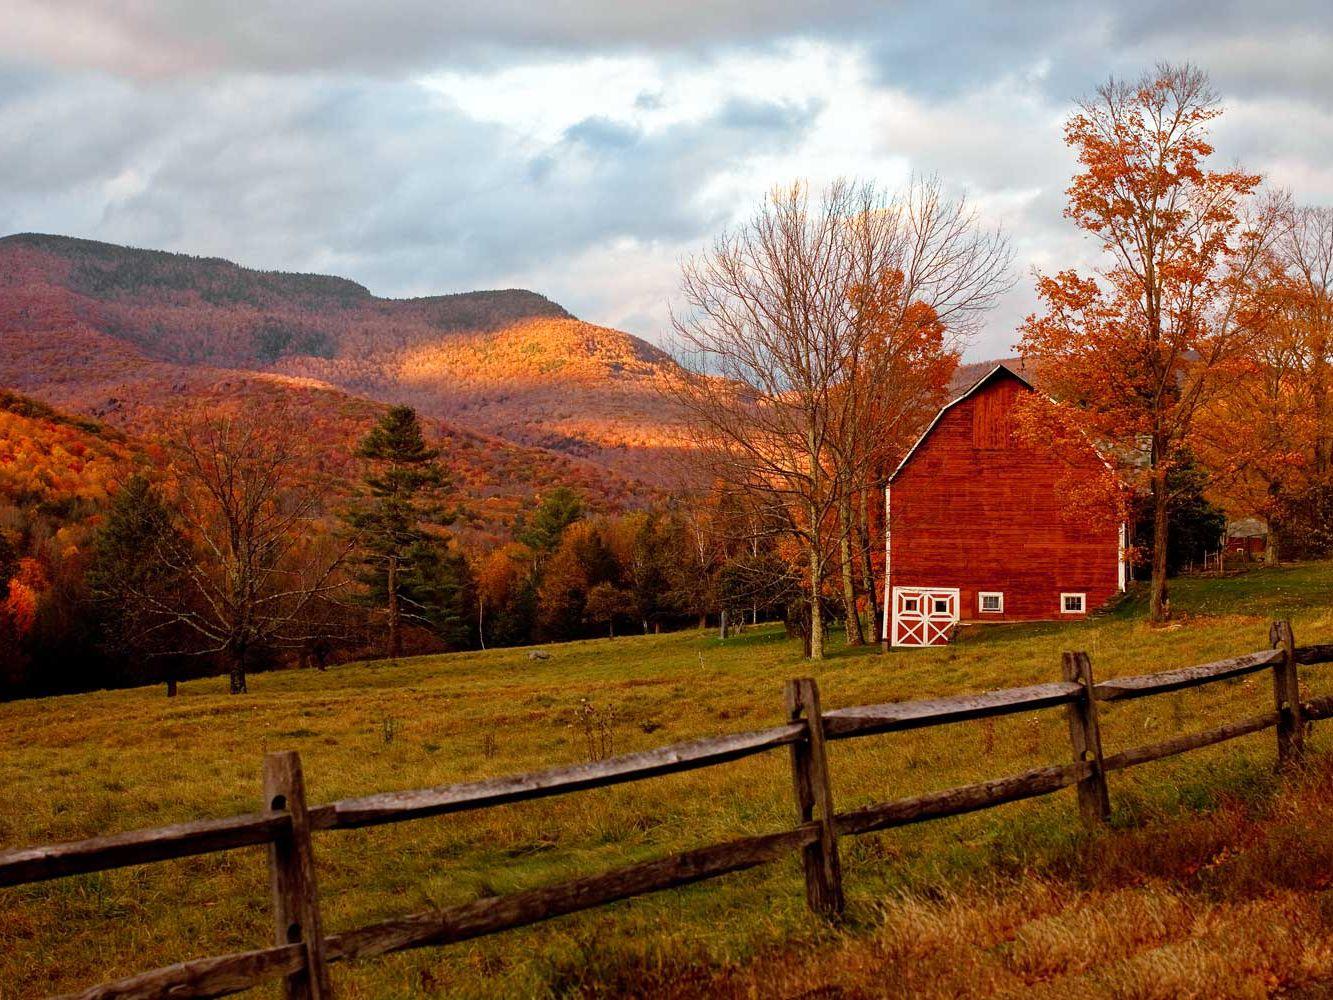 Image of a Barn and Fence in Autumn